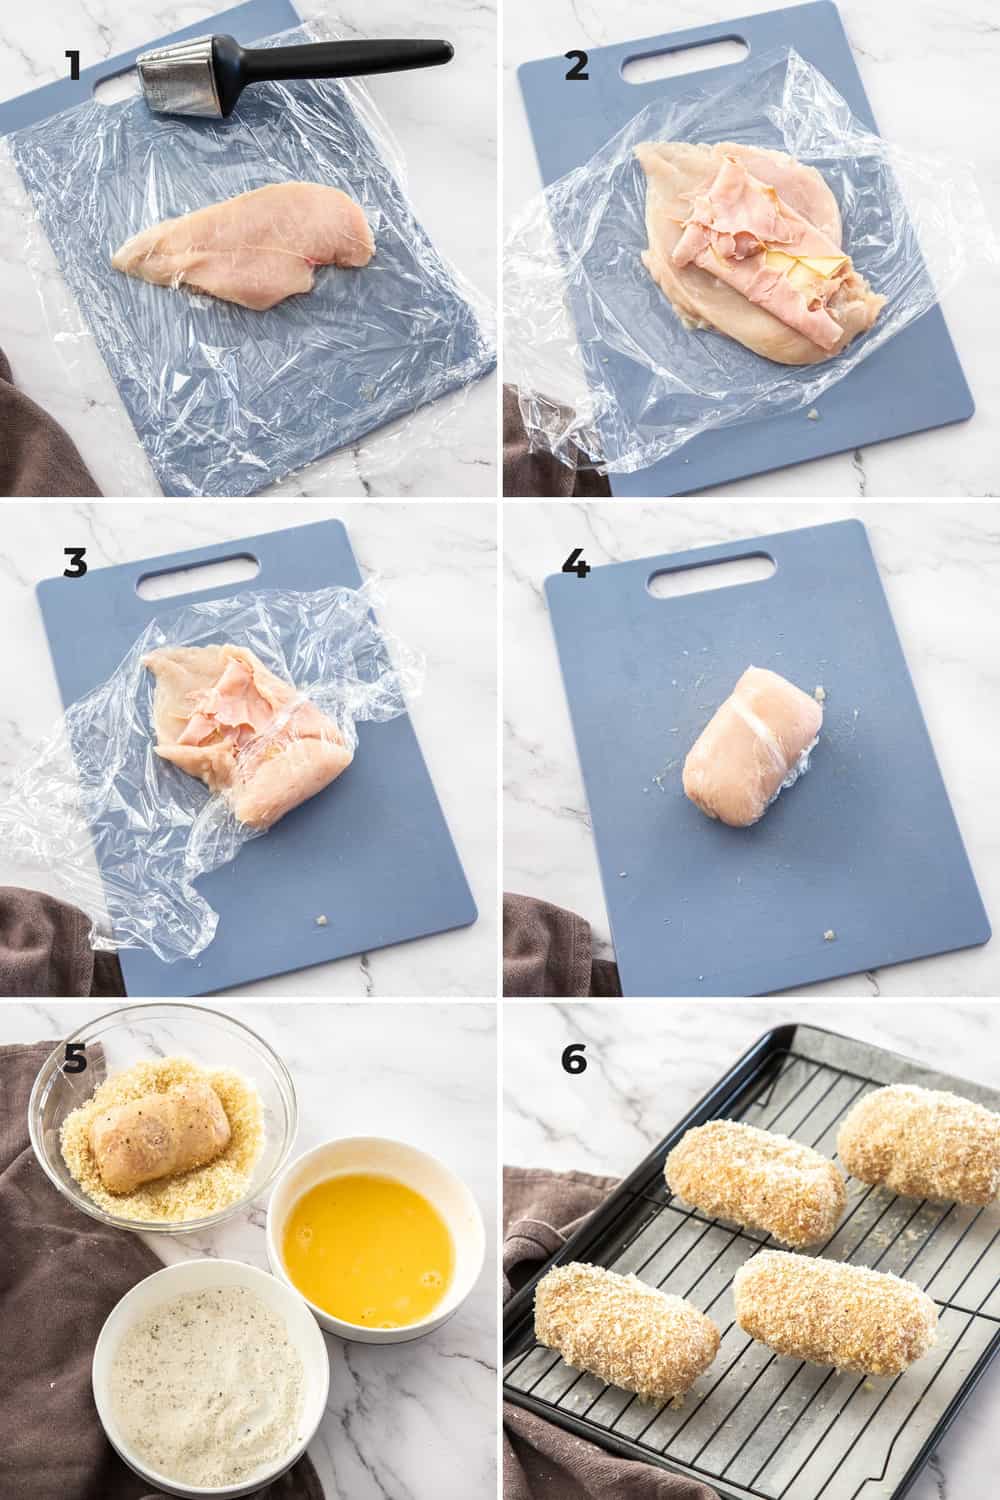 6 images showing how to fill and coat chicken cordon bleu.